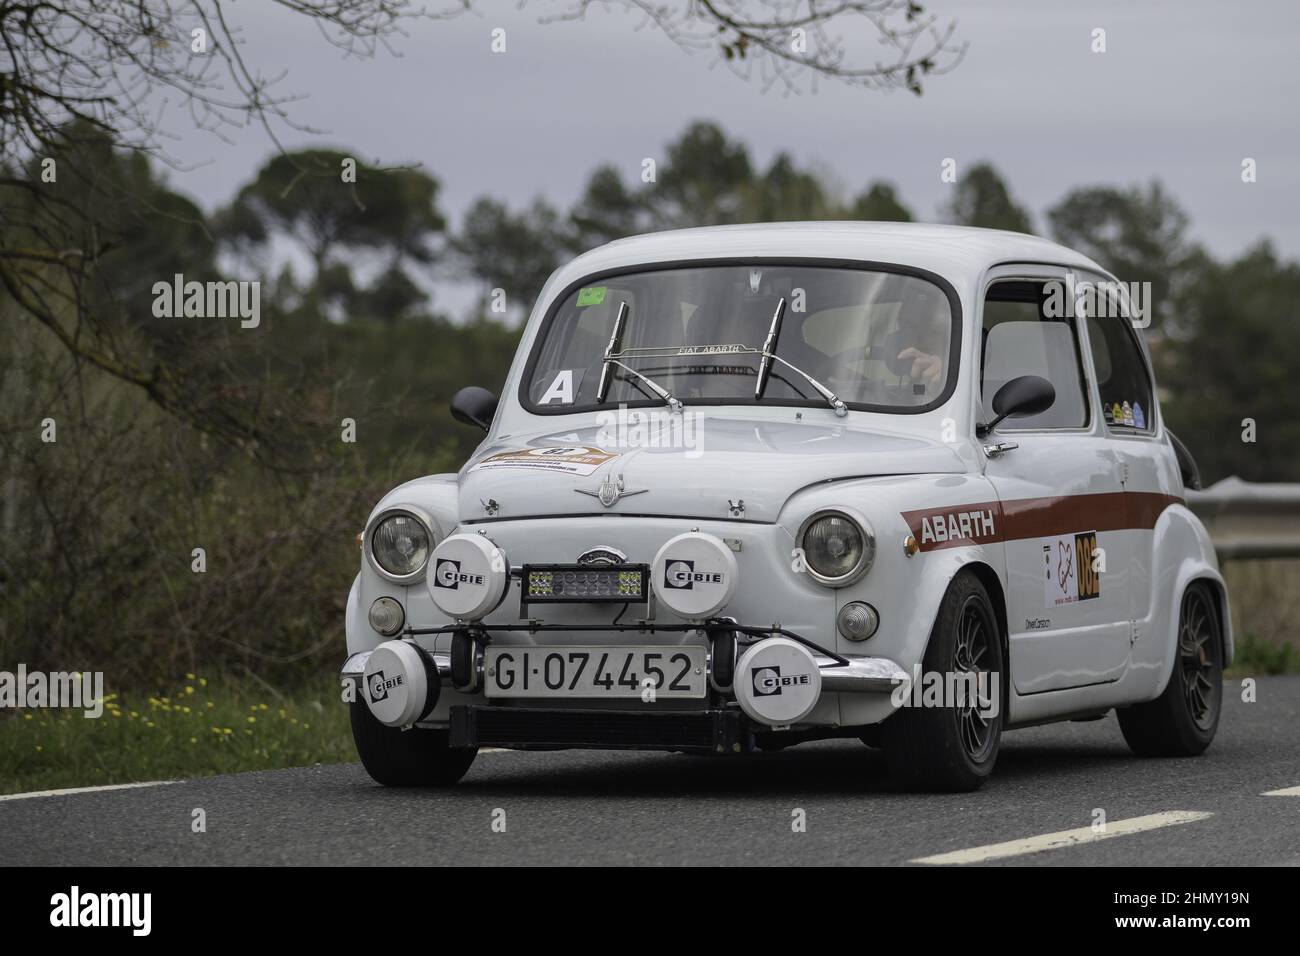 Photo of a white Fiat 600 classic rally car in the street Stock Photo